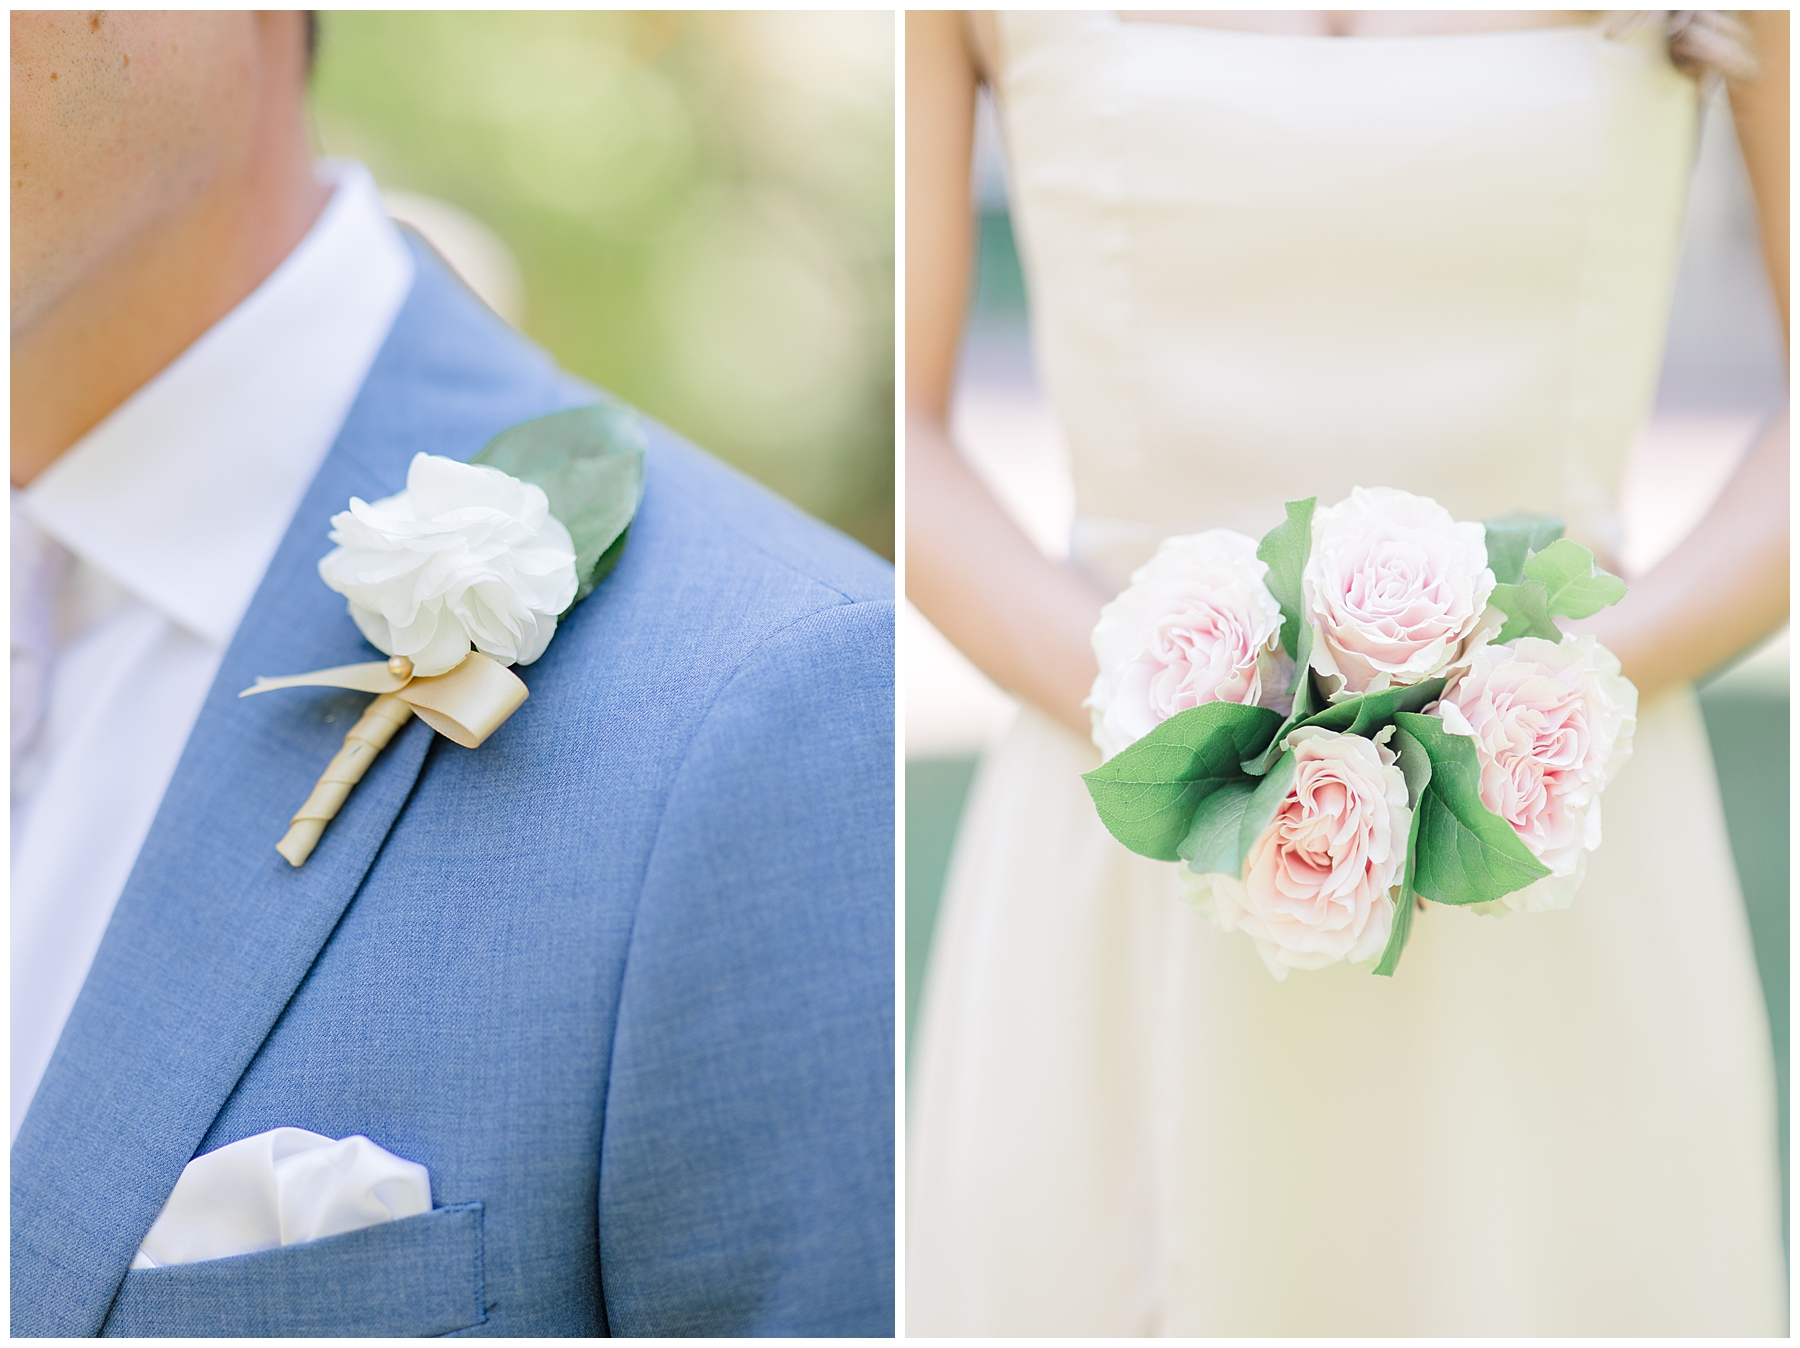 wedding flowers from bridal bouquet and groom's boutonniere 